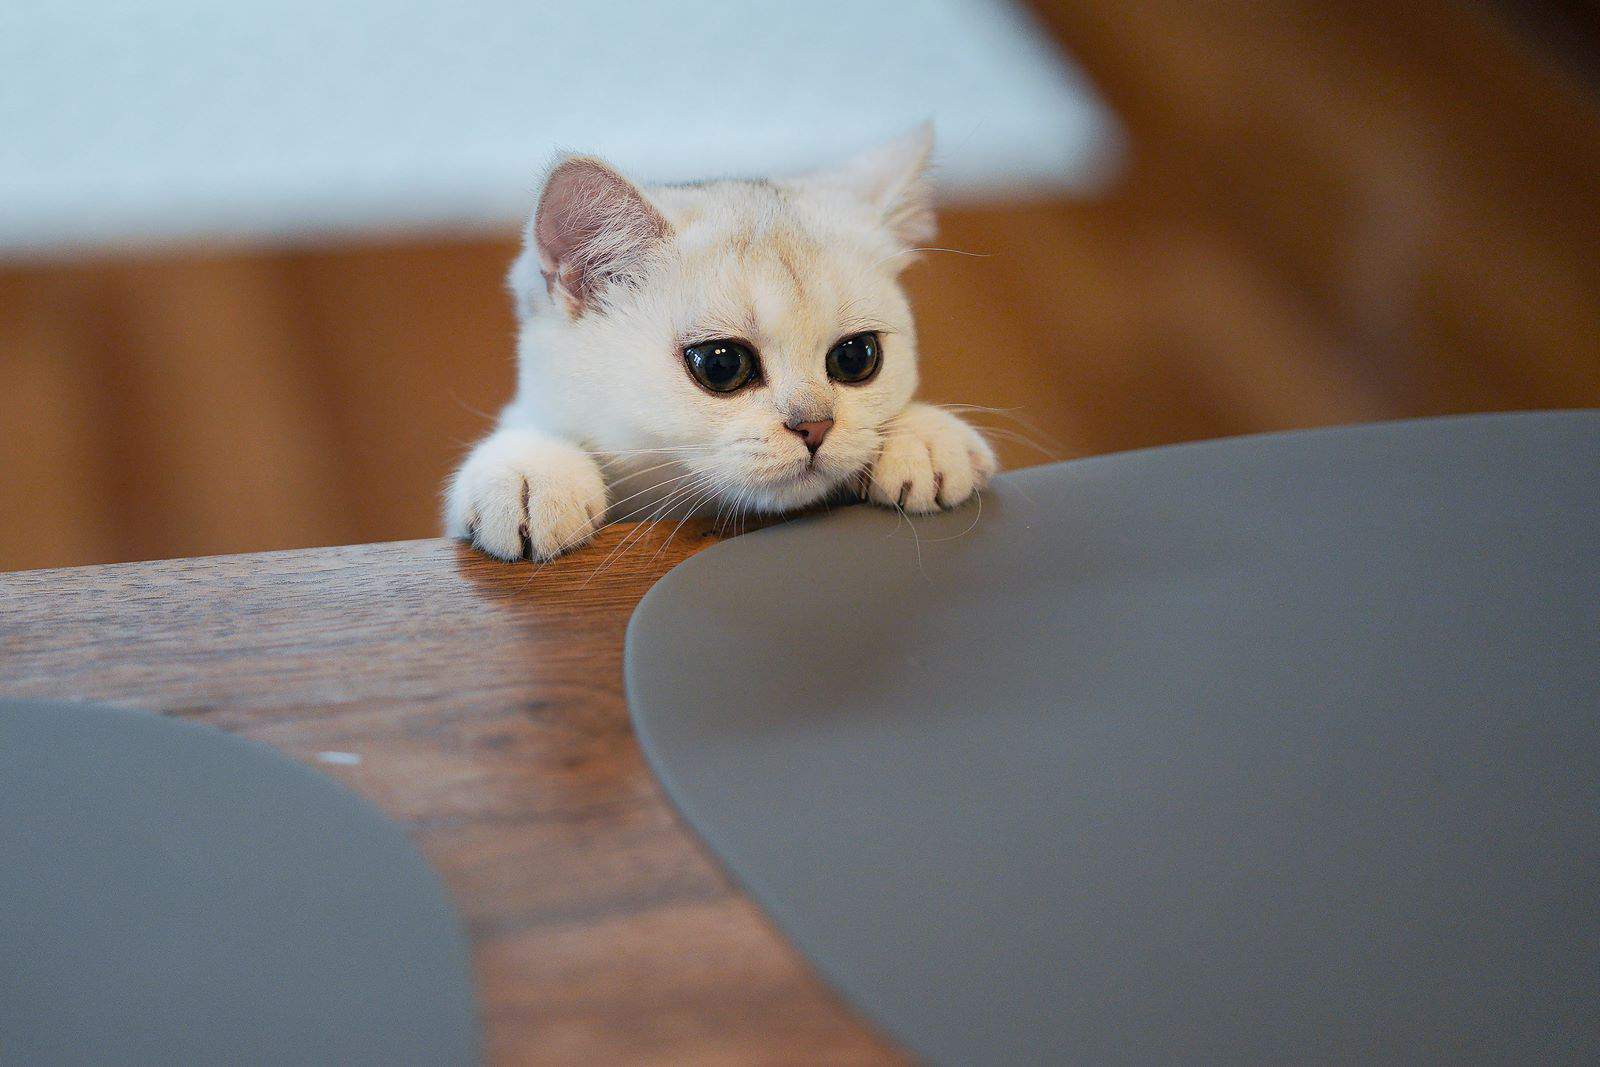 white kitten with big eyes attempting to climb on the table